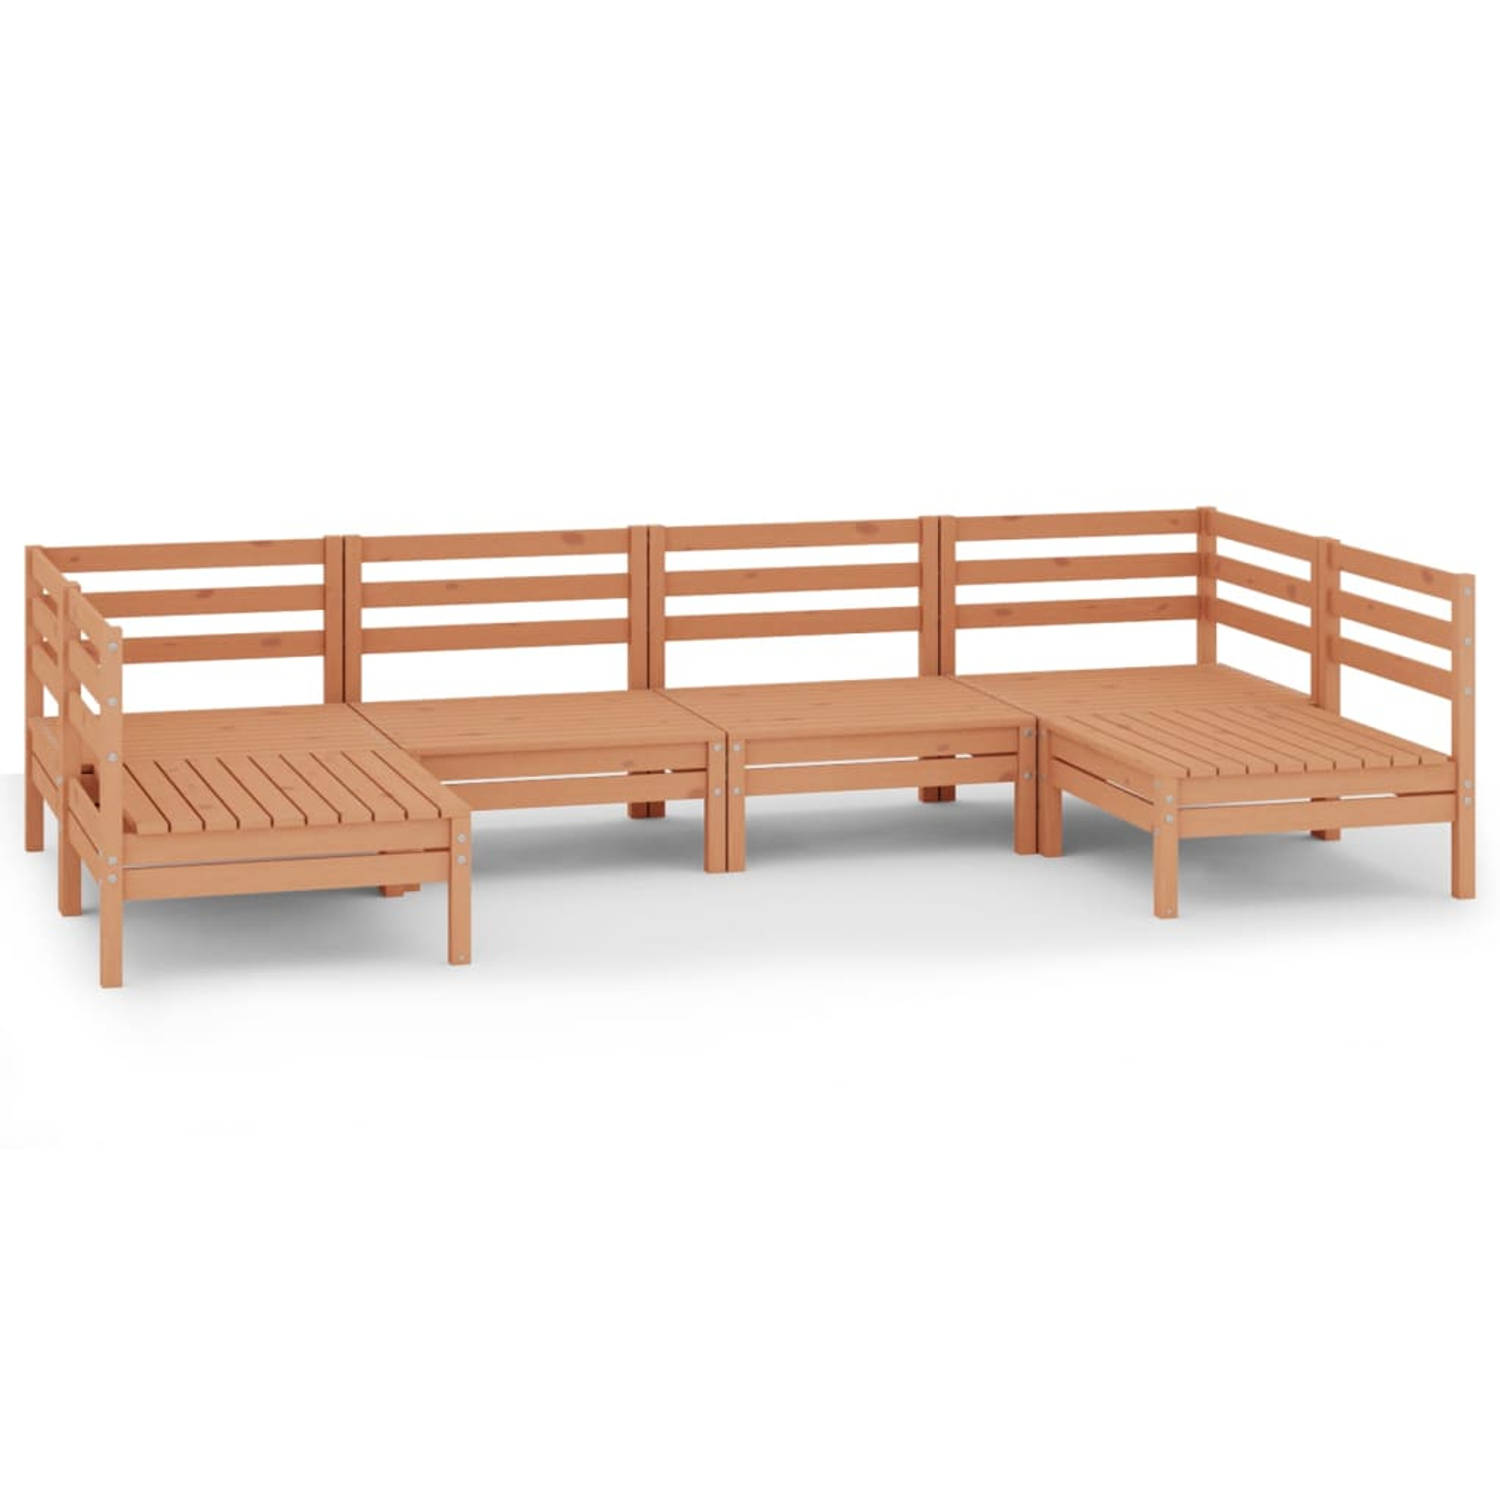 The Living Store 6-delige Loungeset massief grenenhout honingbruin - Tuinset